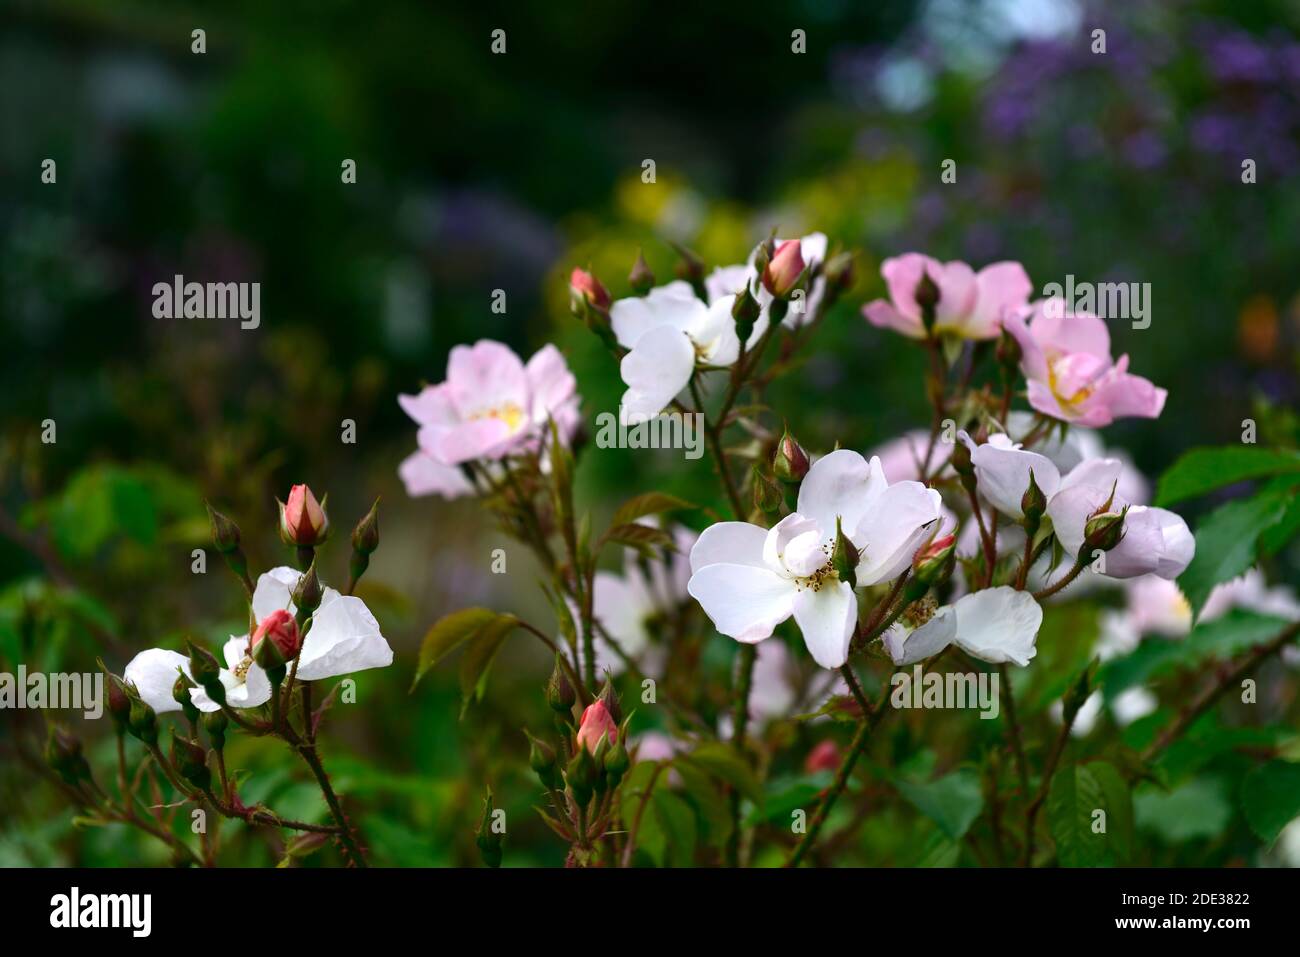 Rose Open Arms High Resolution Stock Photography and Images - Alamy